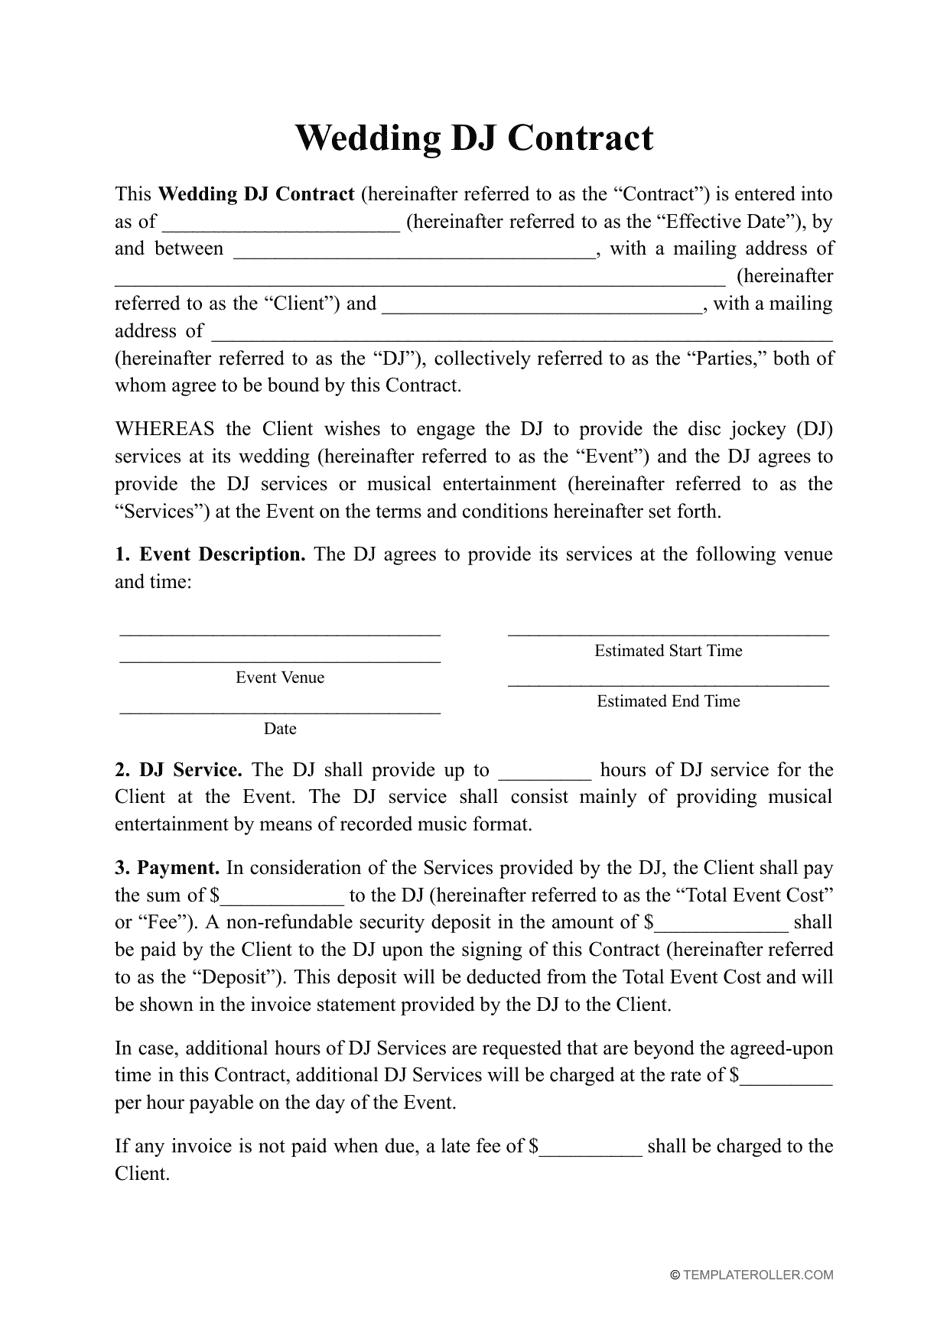 Wedding DJ Contract Template, Page 1